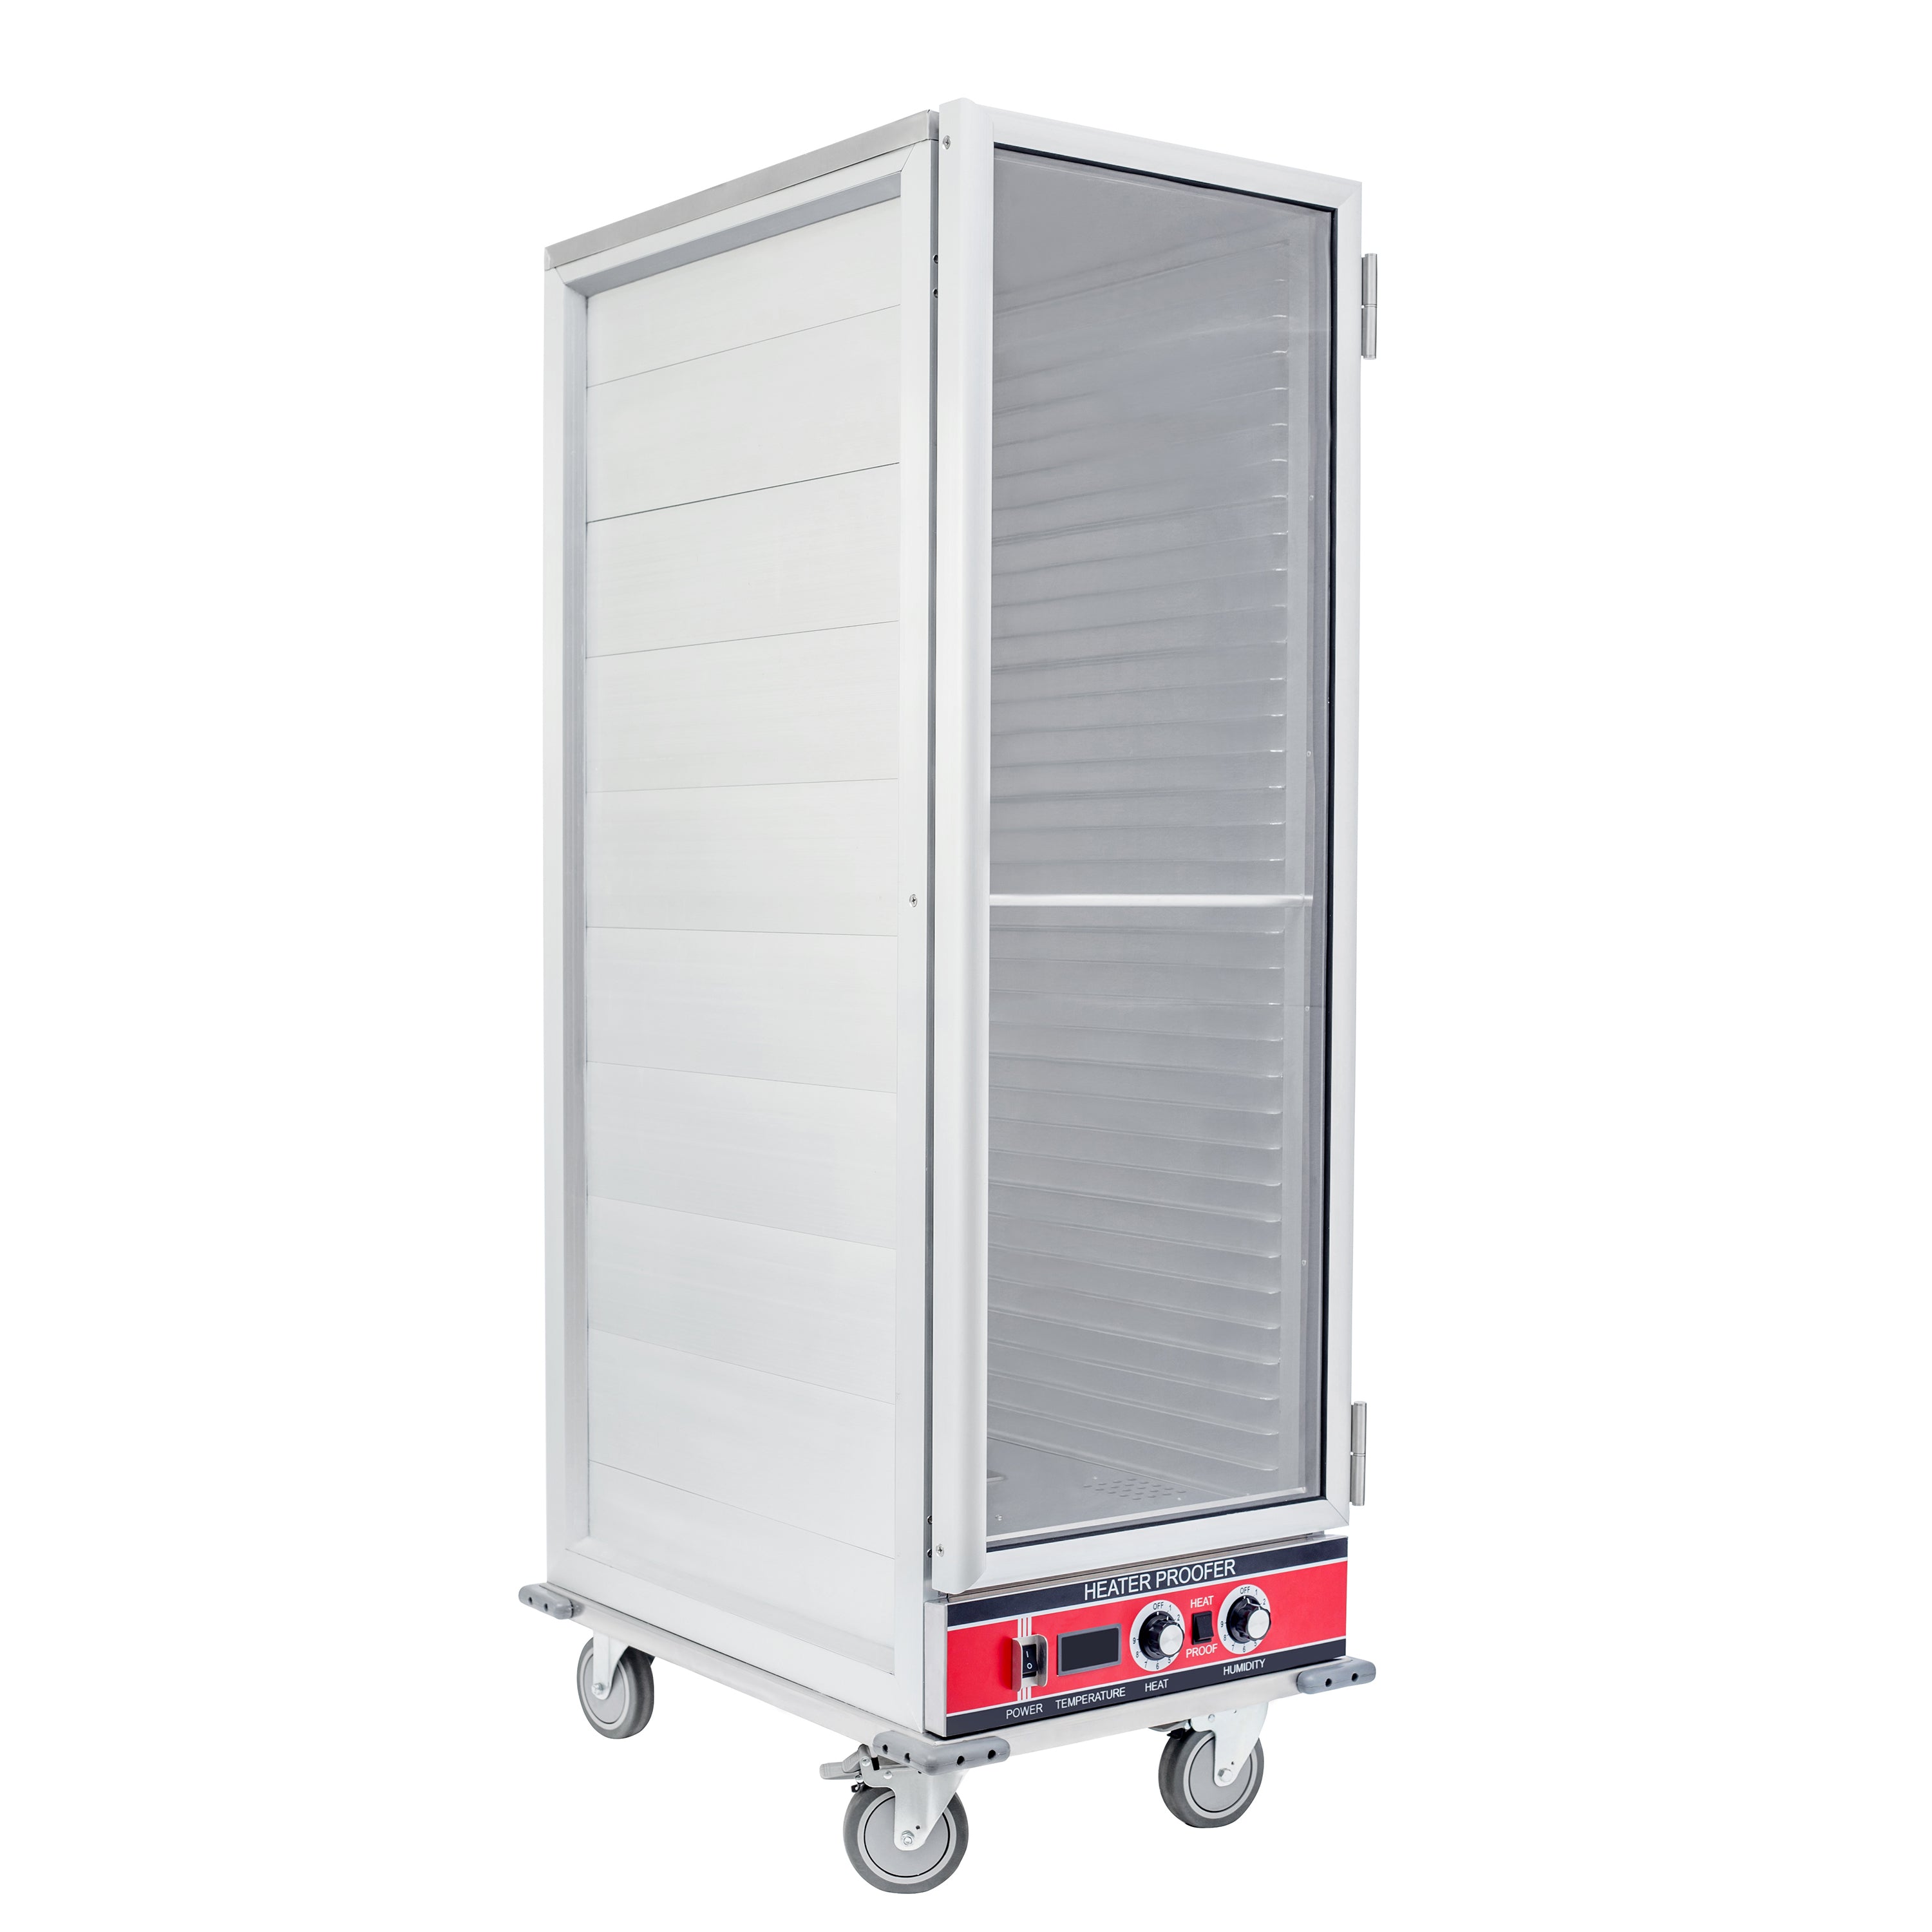 BevLes - HPIC-6836, BevLes Full Size Insulated HPC Proofing & Holding Cabinet, 1 Clear Door, in Silver